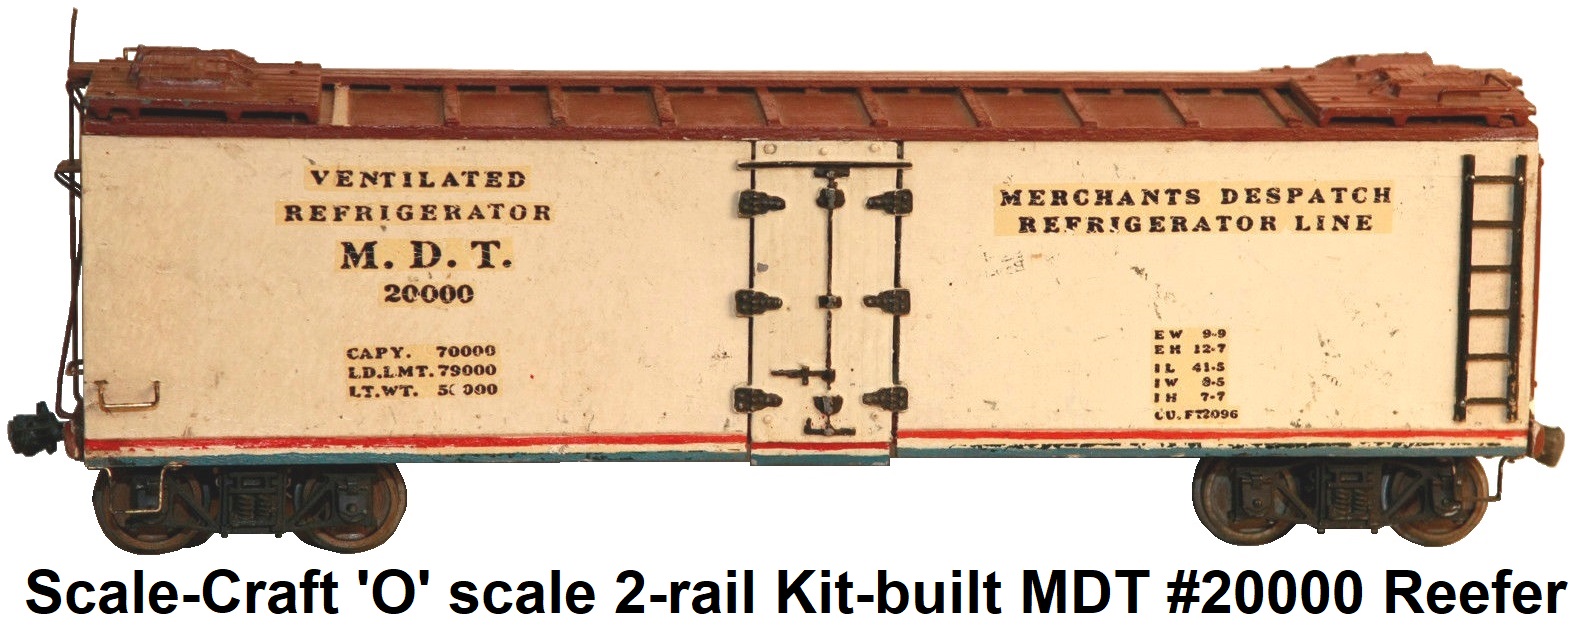 Scale-Craft 'O' scale Kit-built MDT #20000 Reefer 2-rail